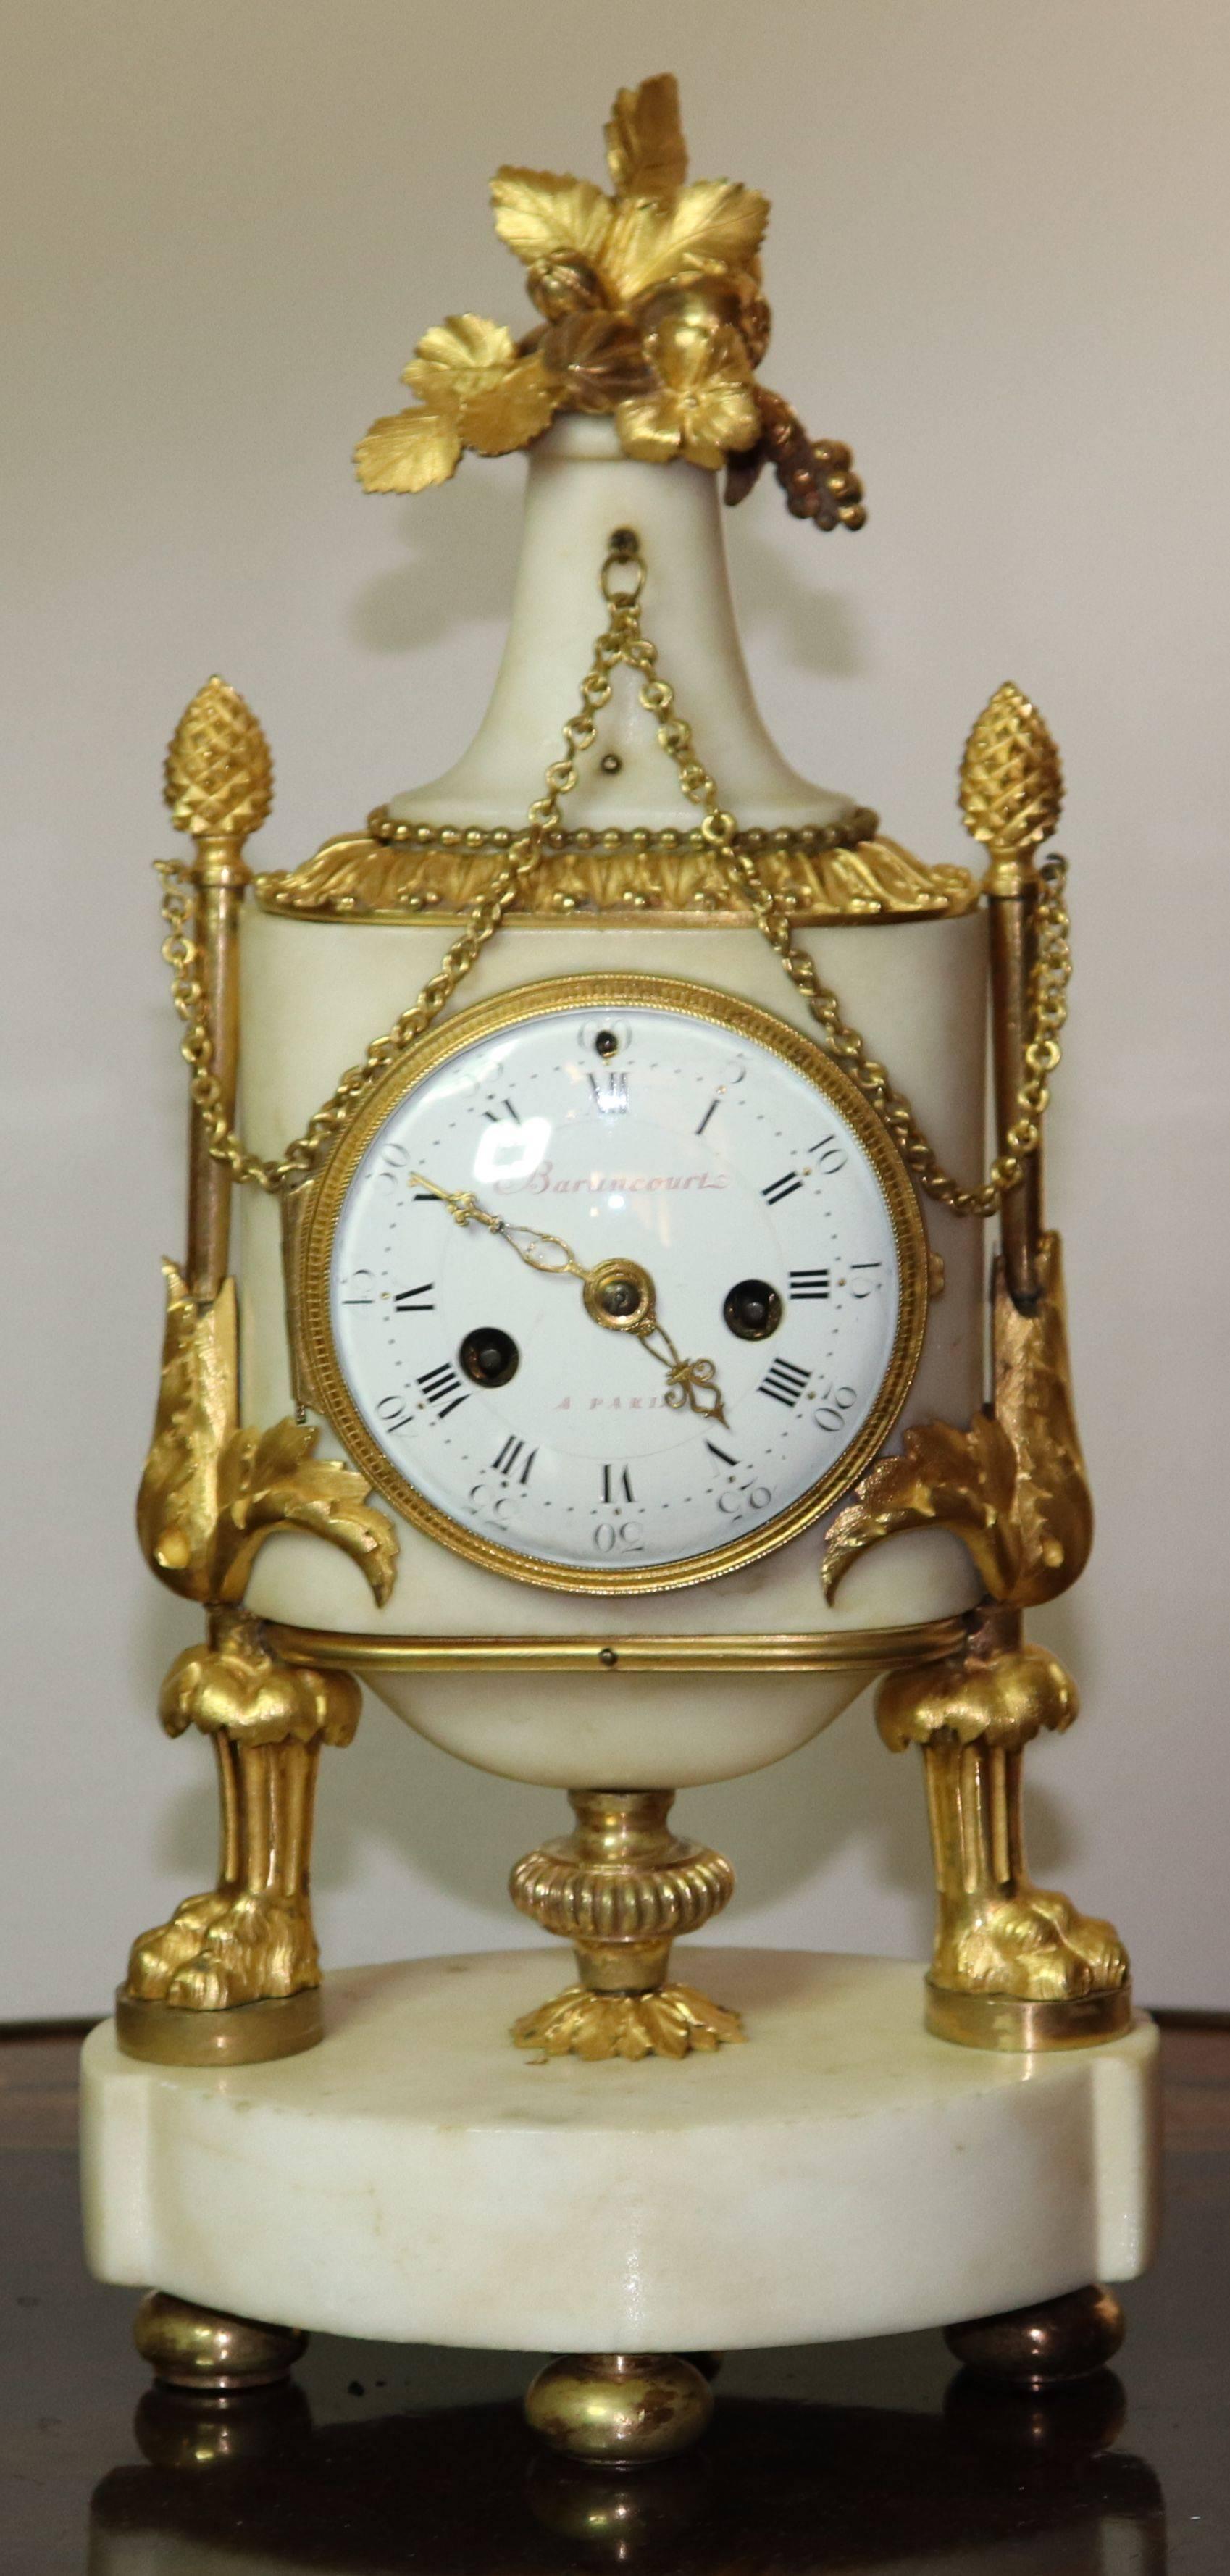 Hand-Carved Louis XVI Giltbronze and Marble Clock Signed Barancourt a Paris For Sale